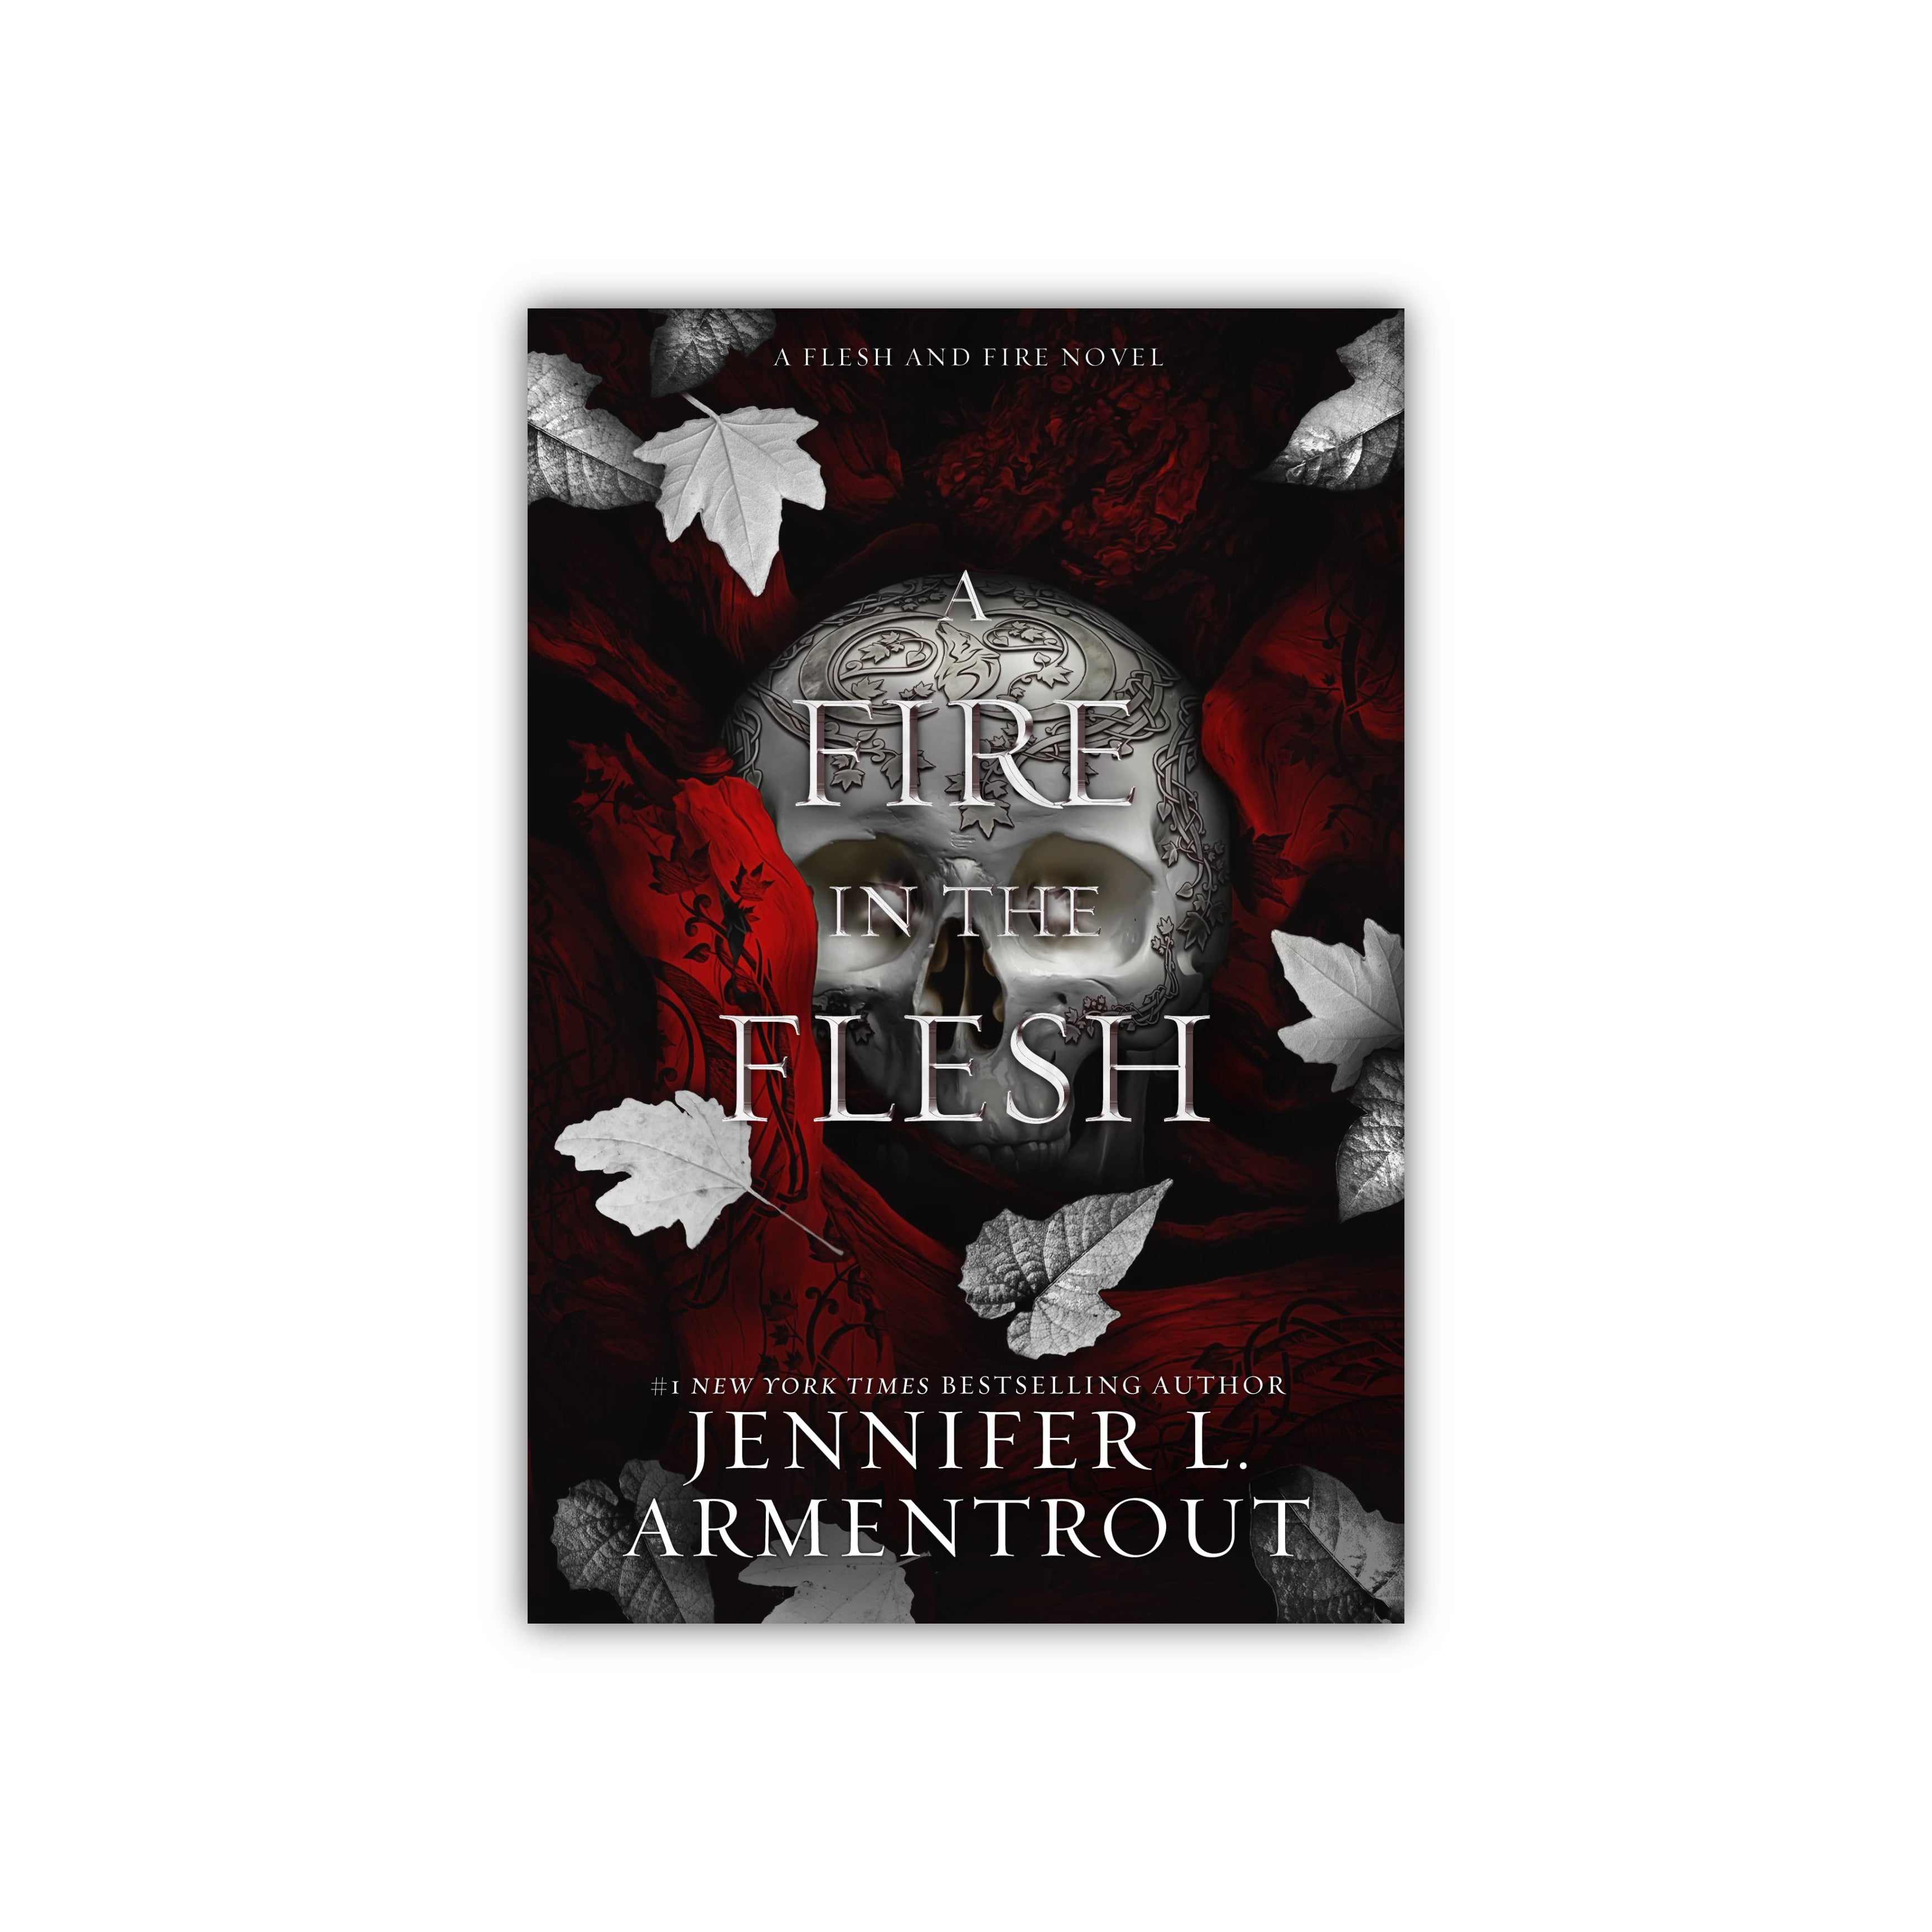 A Fire in the Flesh (Flesh and Fire, #3) by Jennifer L. Armentrout